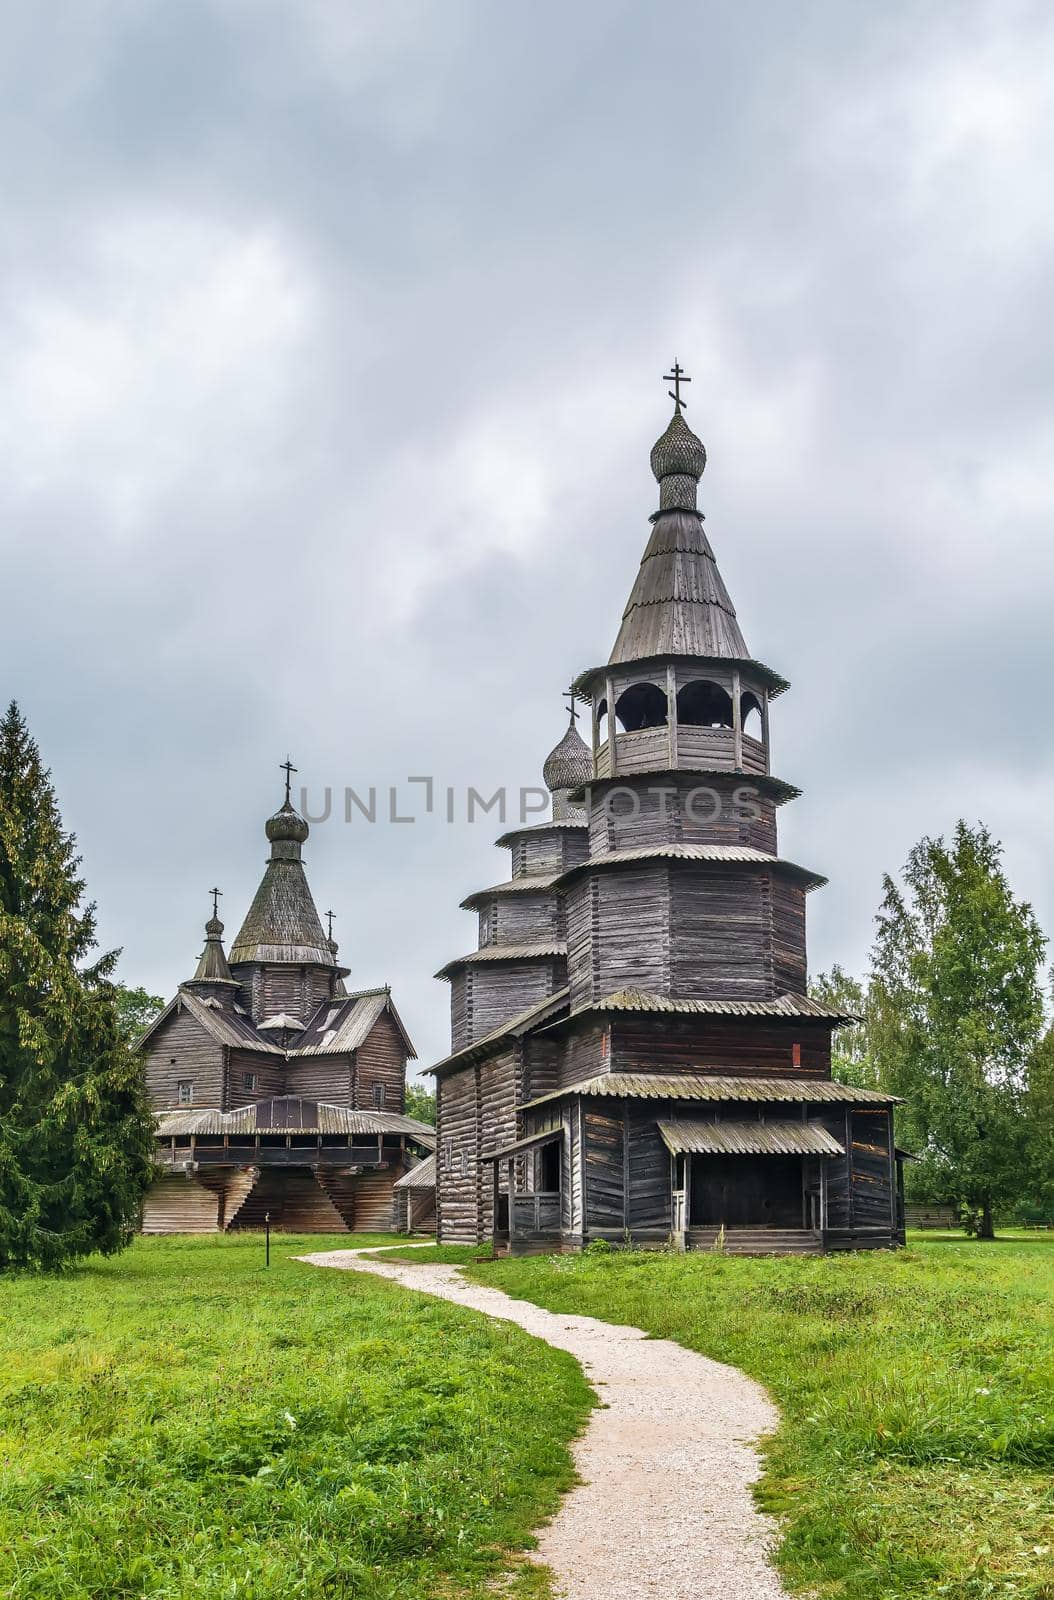 Tiered Church of St. Nicholas (1757) in Museum of Russian Wooden Architecture "Vitoslavlitsy" near Veliky Novgorod, Russia